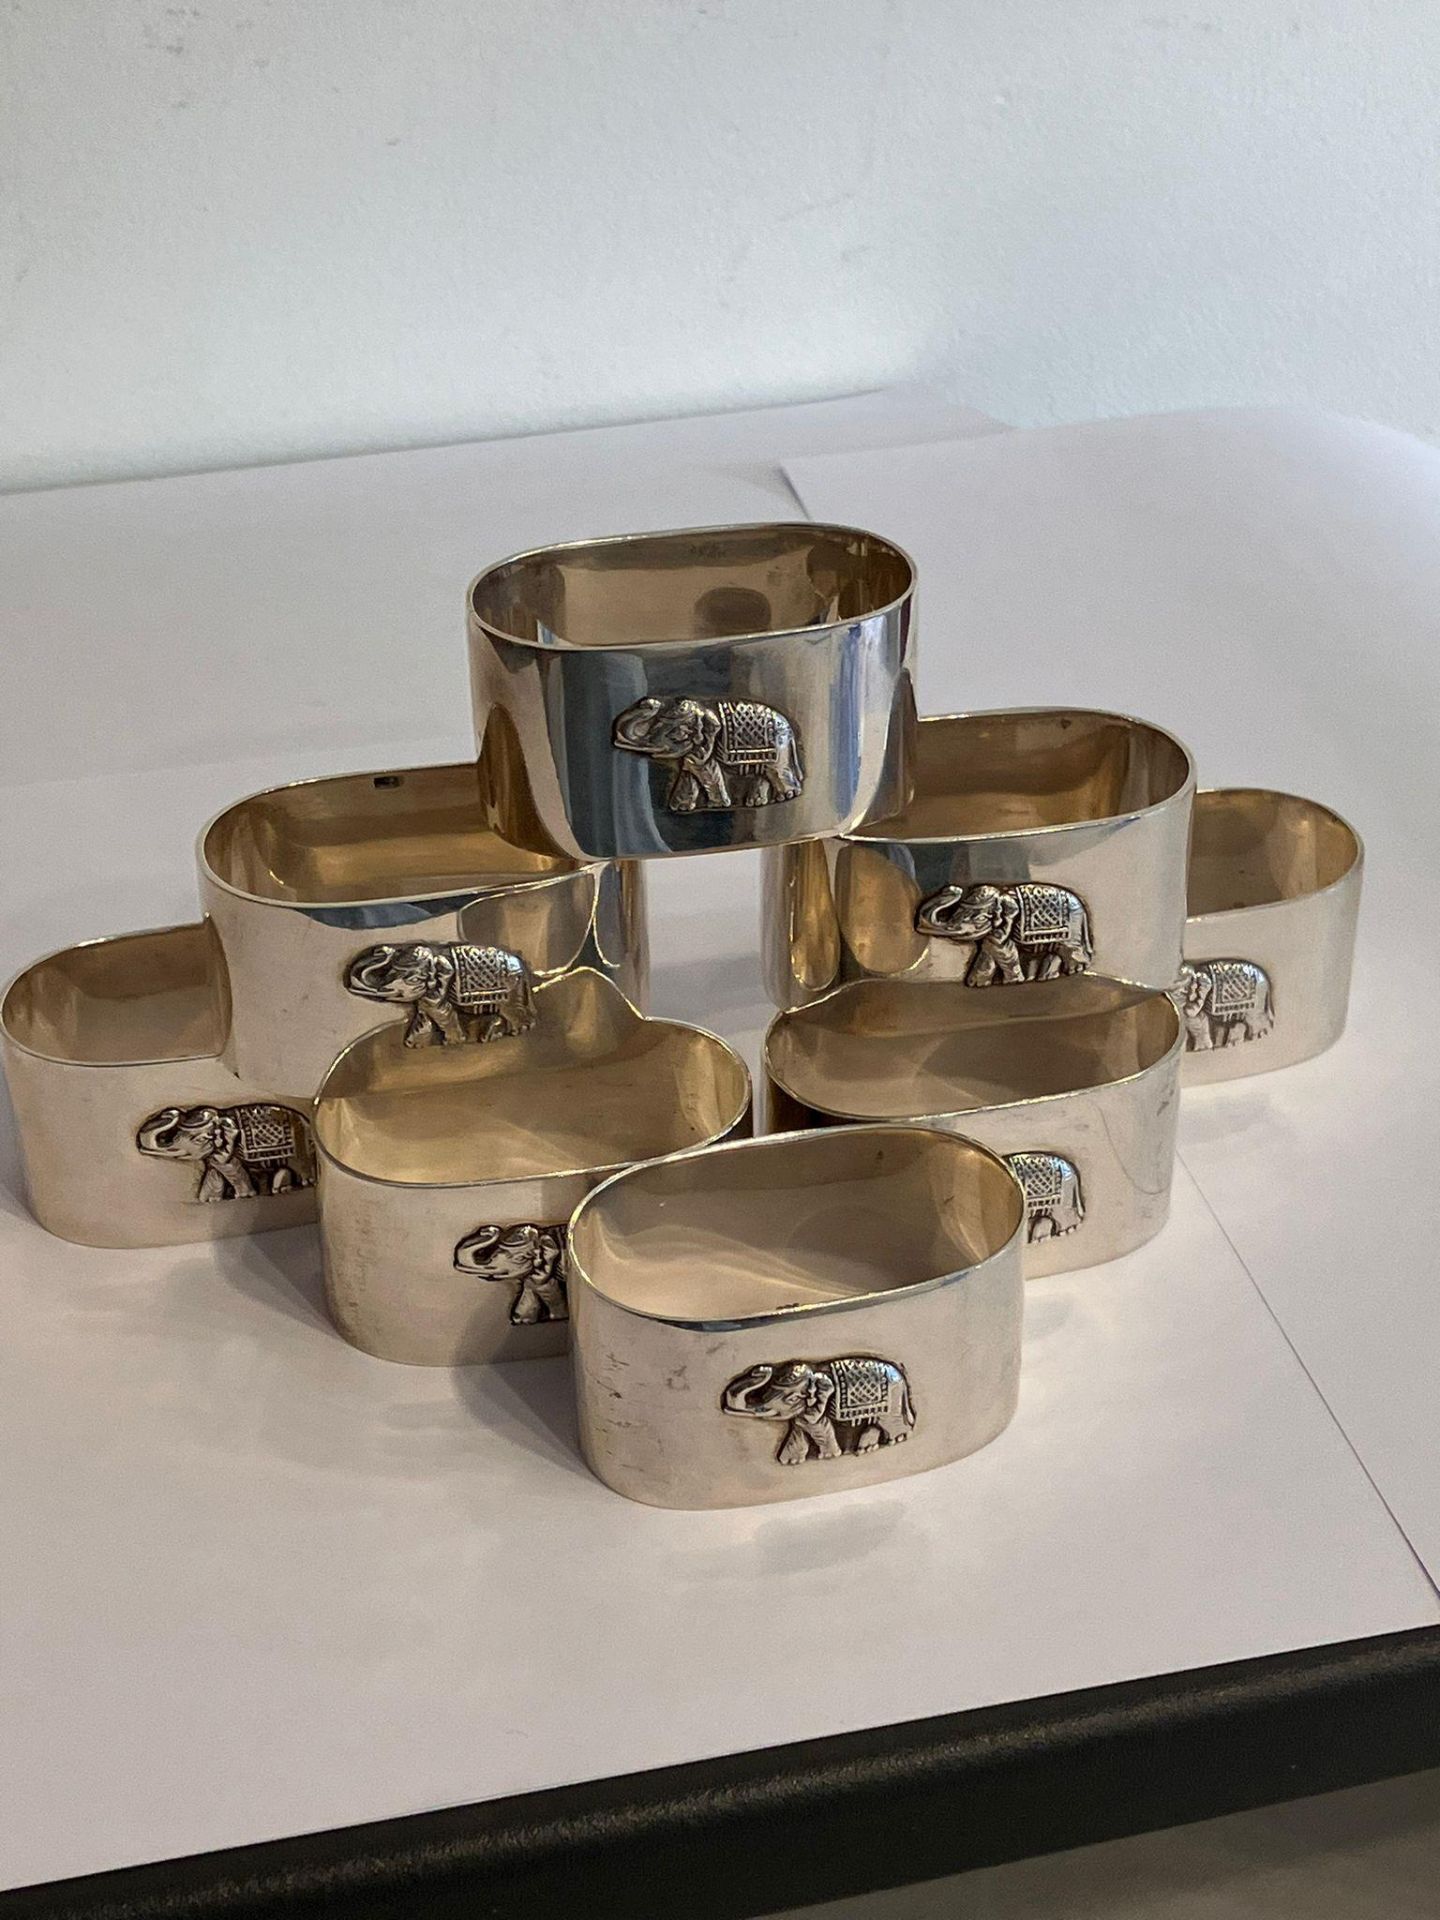 Magnificent set of 8 x SOLID SILVER NAPKIN/ SERVIETTE RINGS. Each piece Embossed with a raised